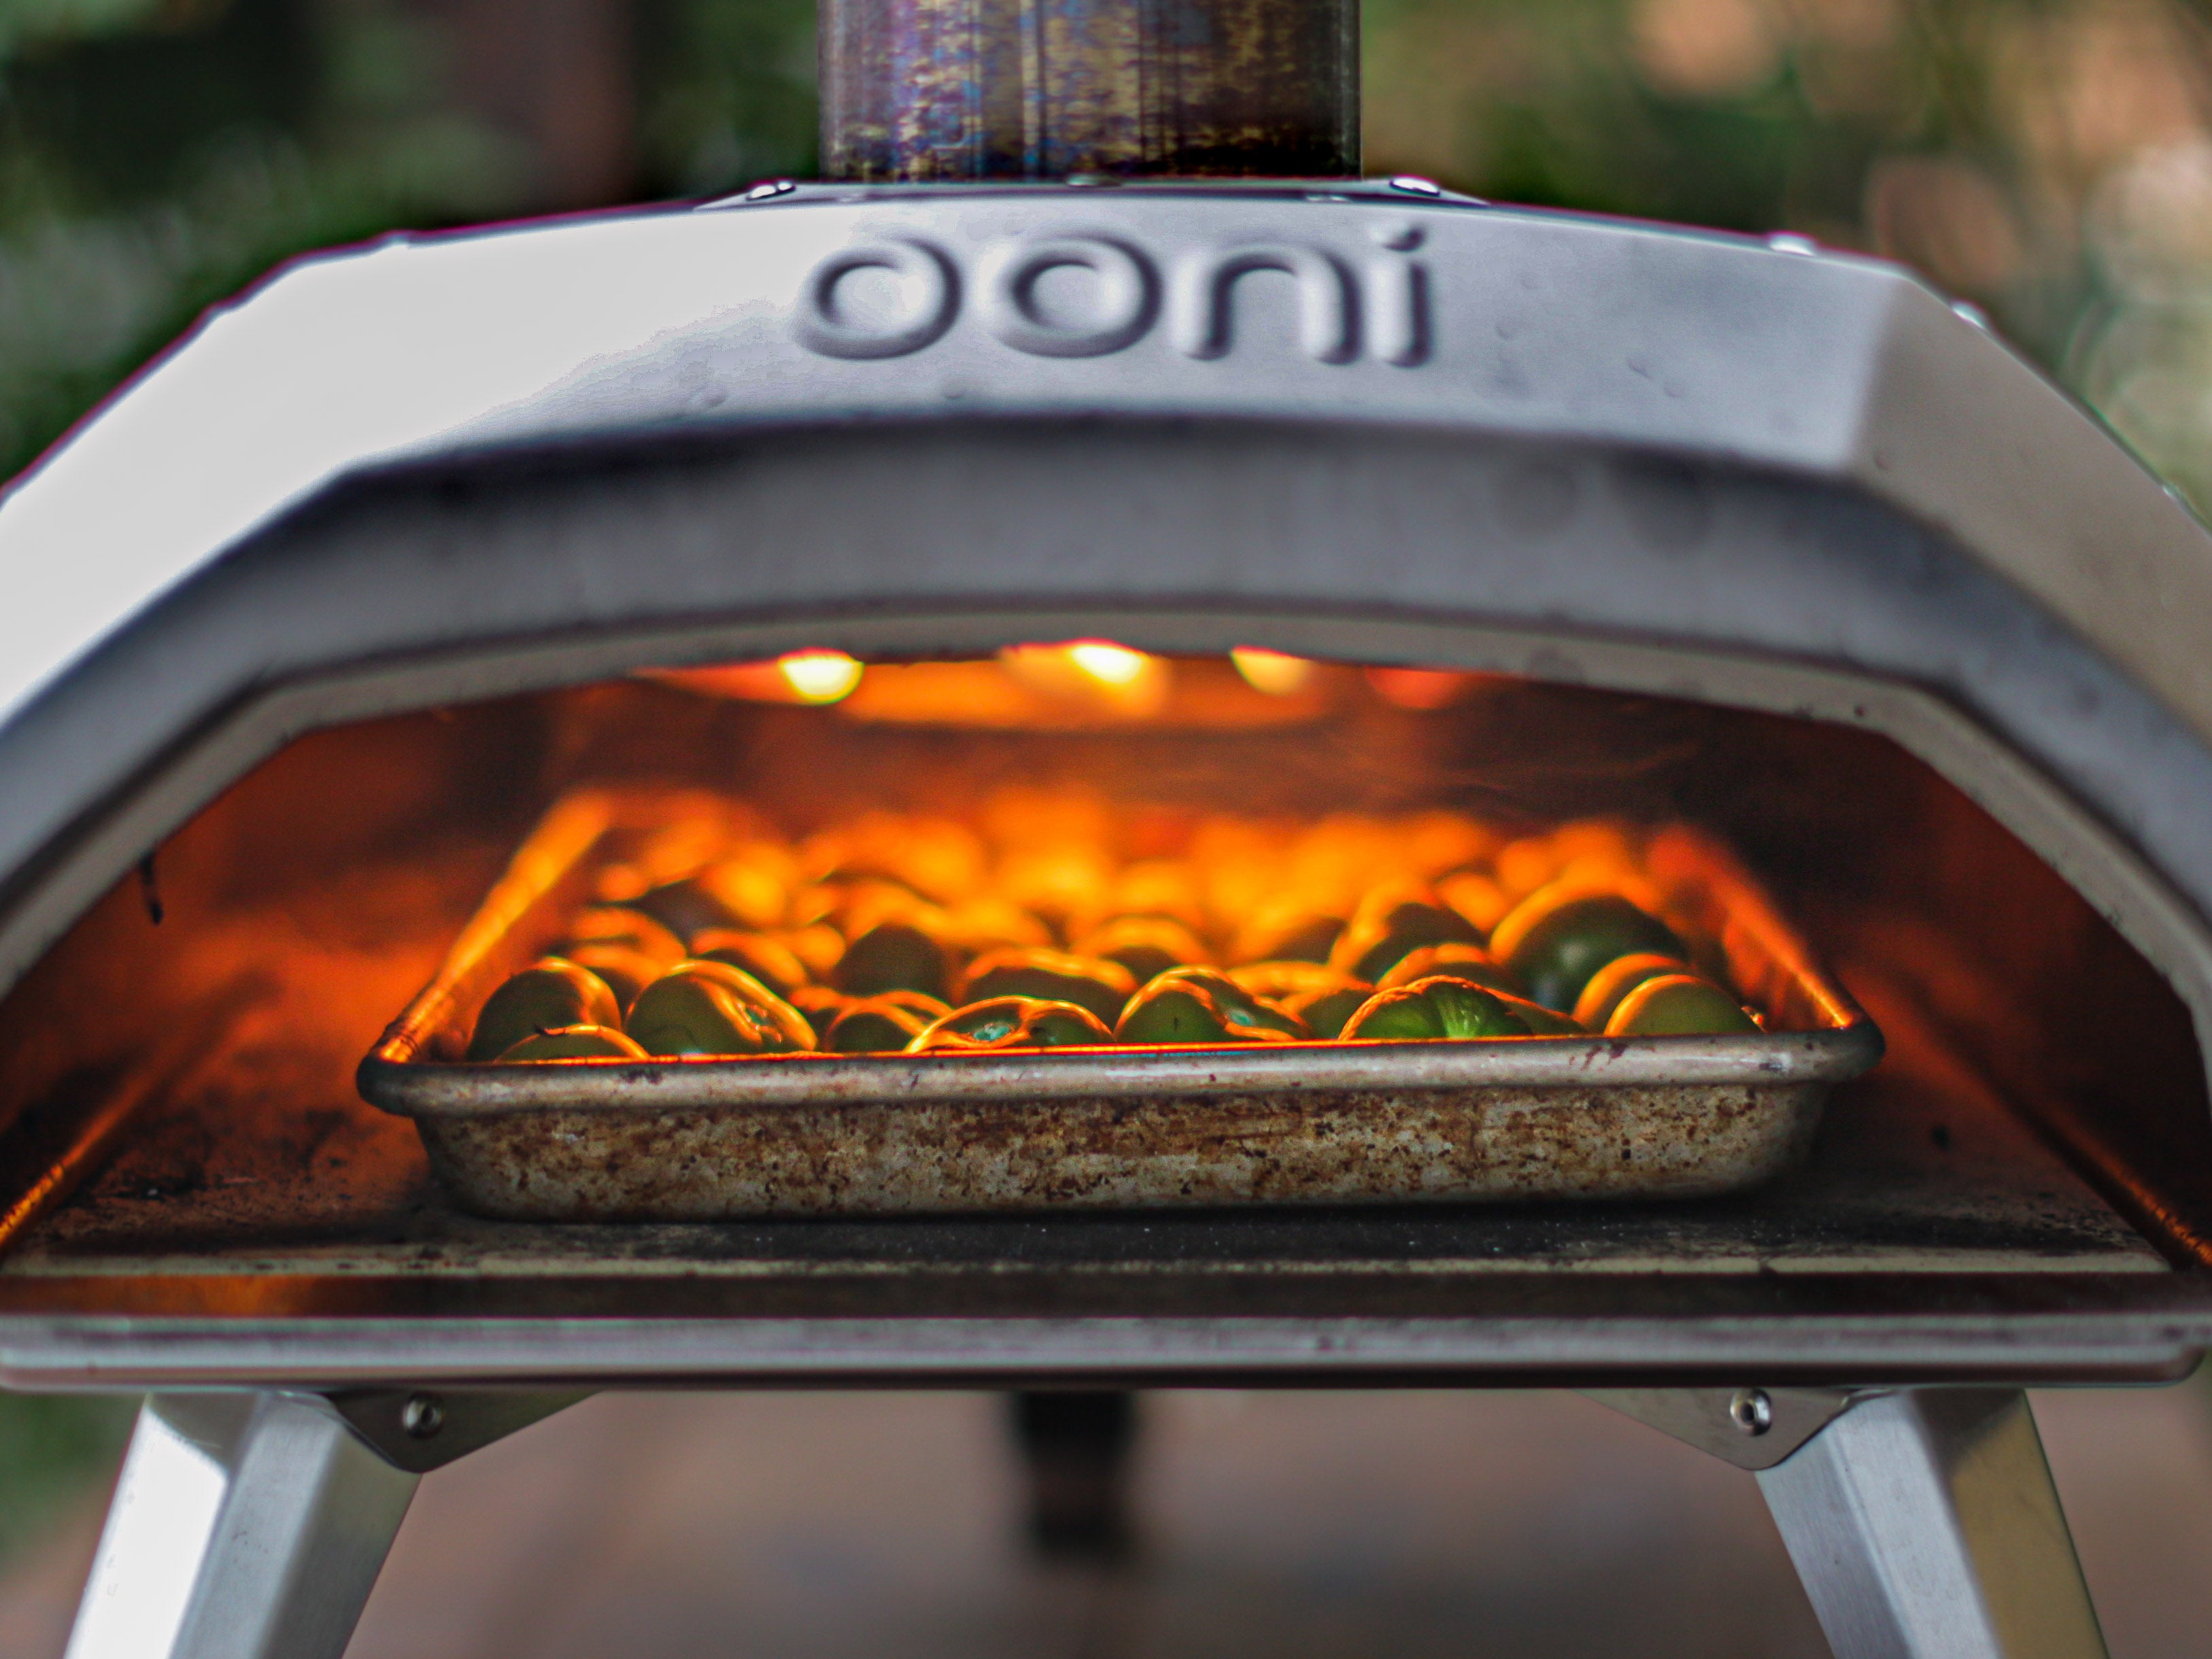 The stress-free way to load your pizza in the oven